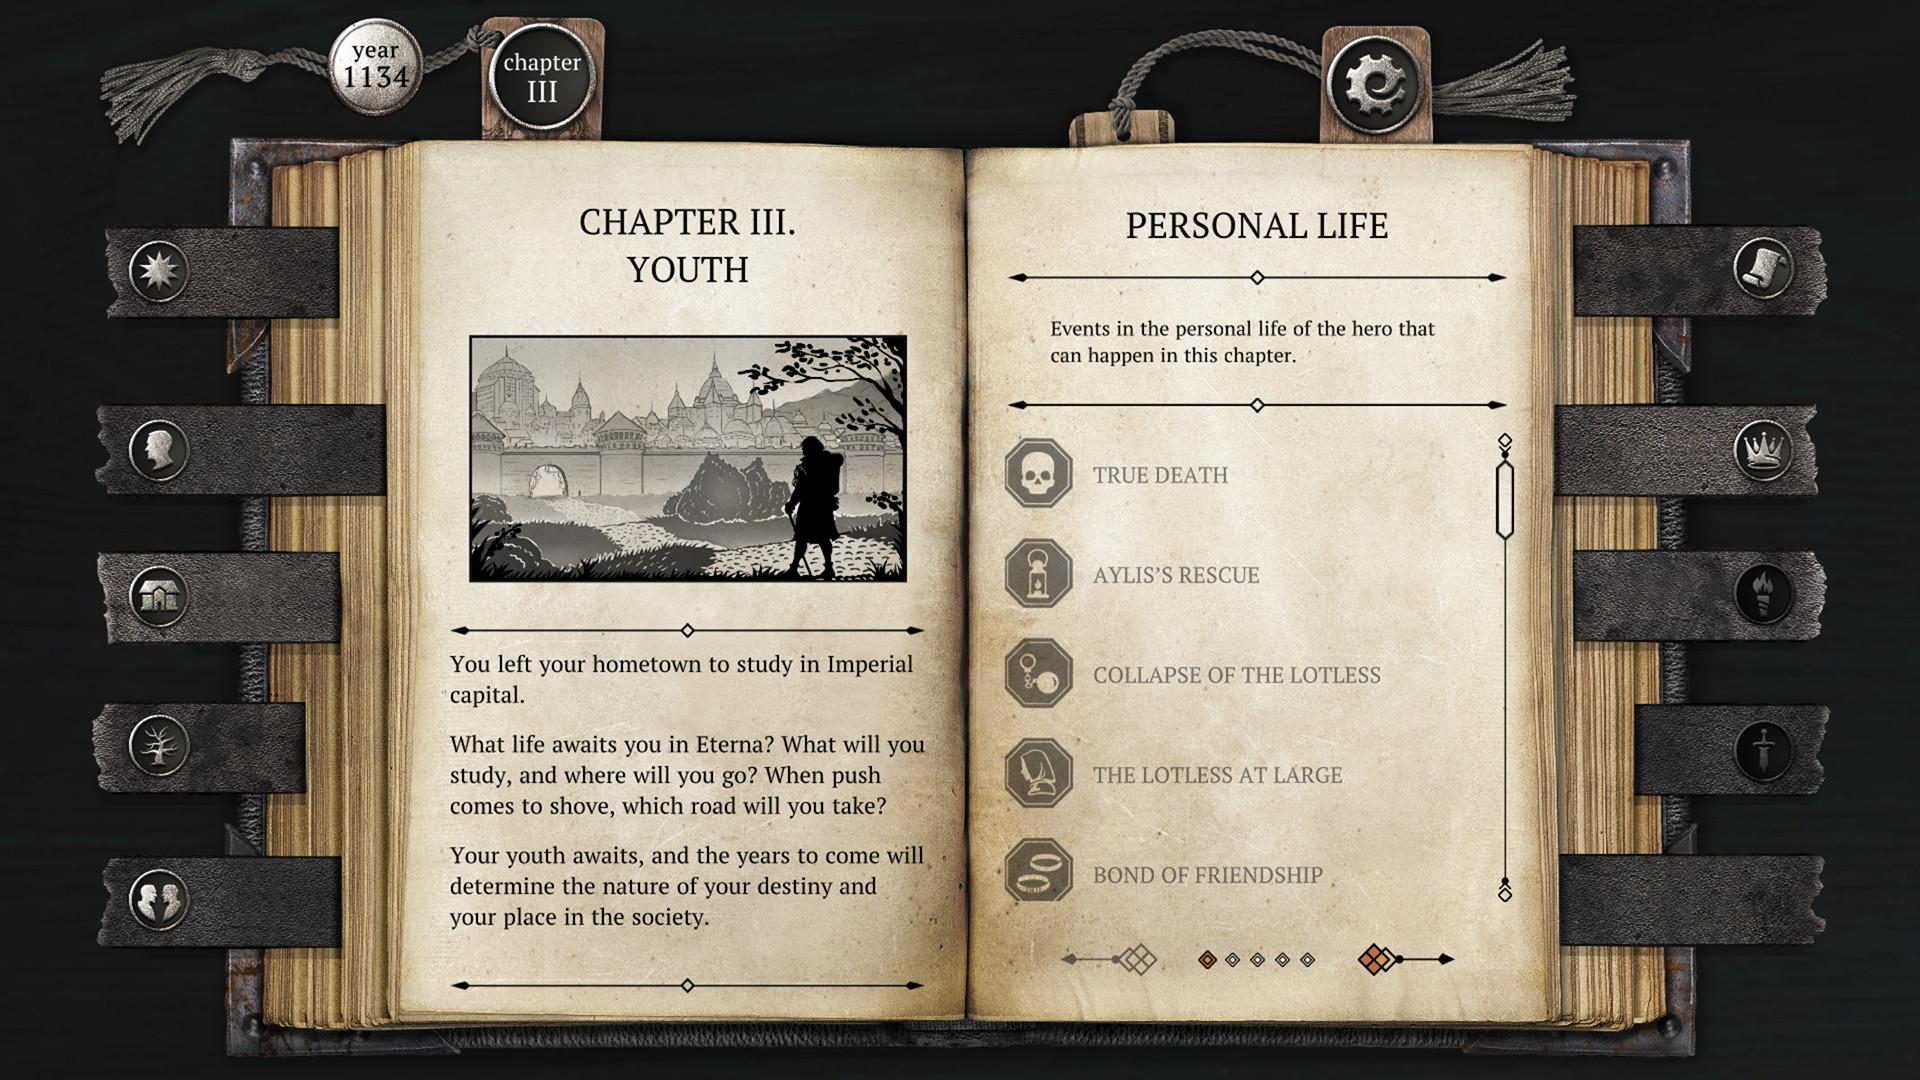 Screenshot №3 from game The Life and Suffering of Sir Brante